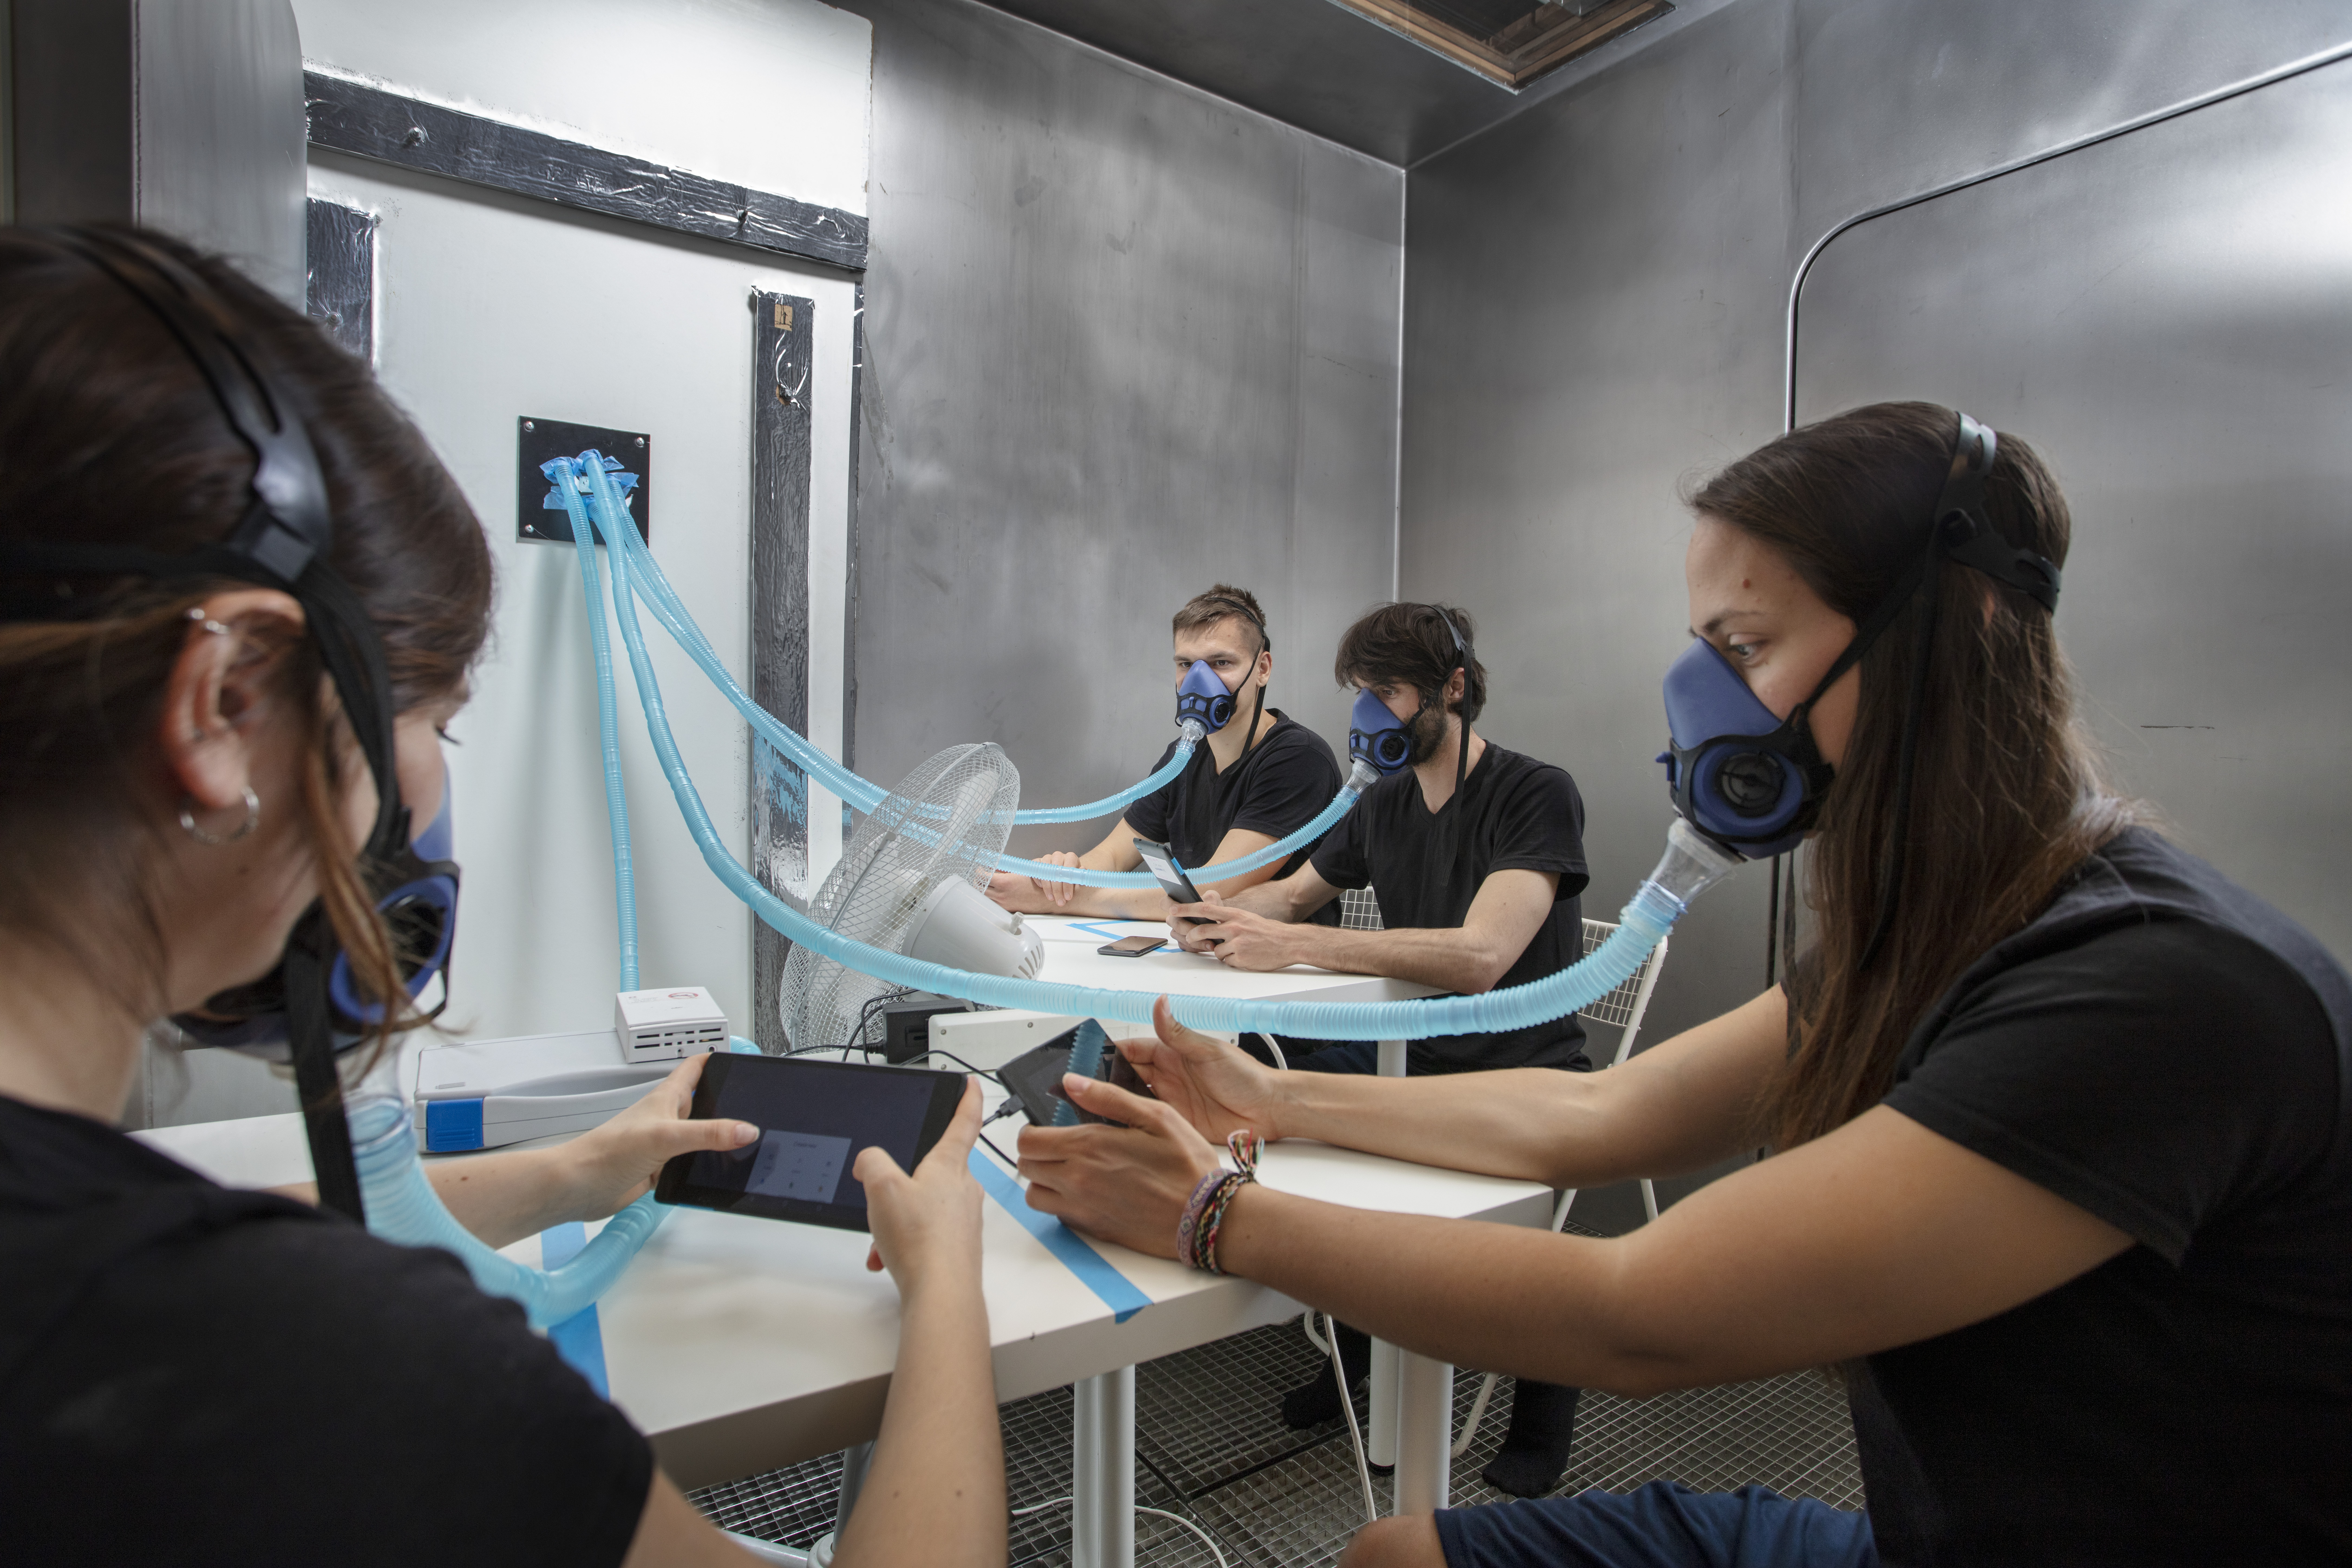 Four people wearing breathing masks while viewing a small tabled device in a sealed chamber